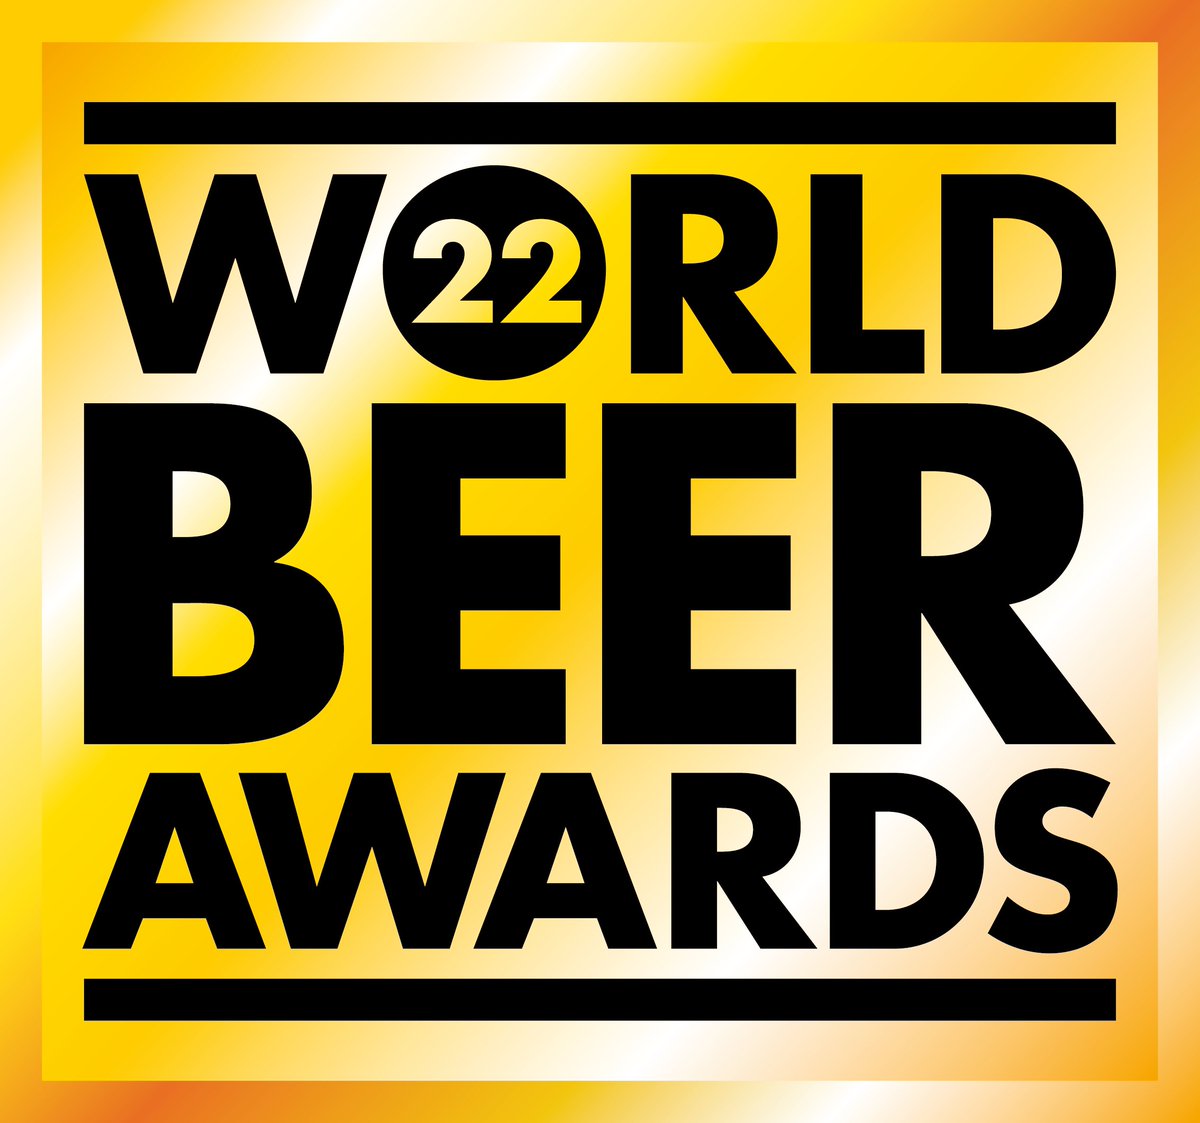 I can't wait until tomorrow to experience @worldbeerawards judging. Many thanks to @ATJbeer for getting me involved